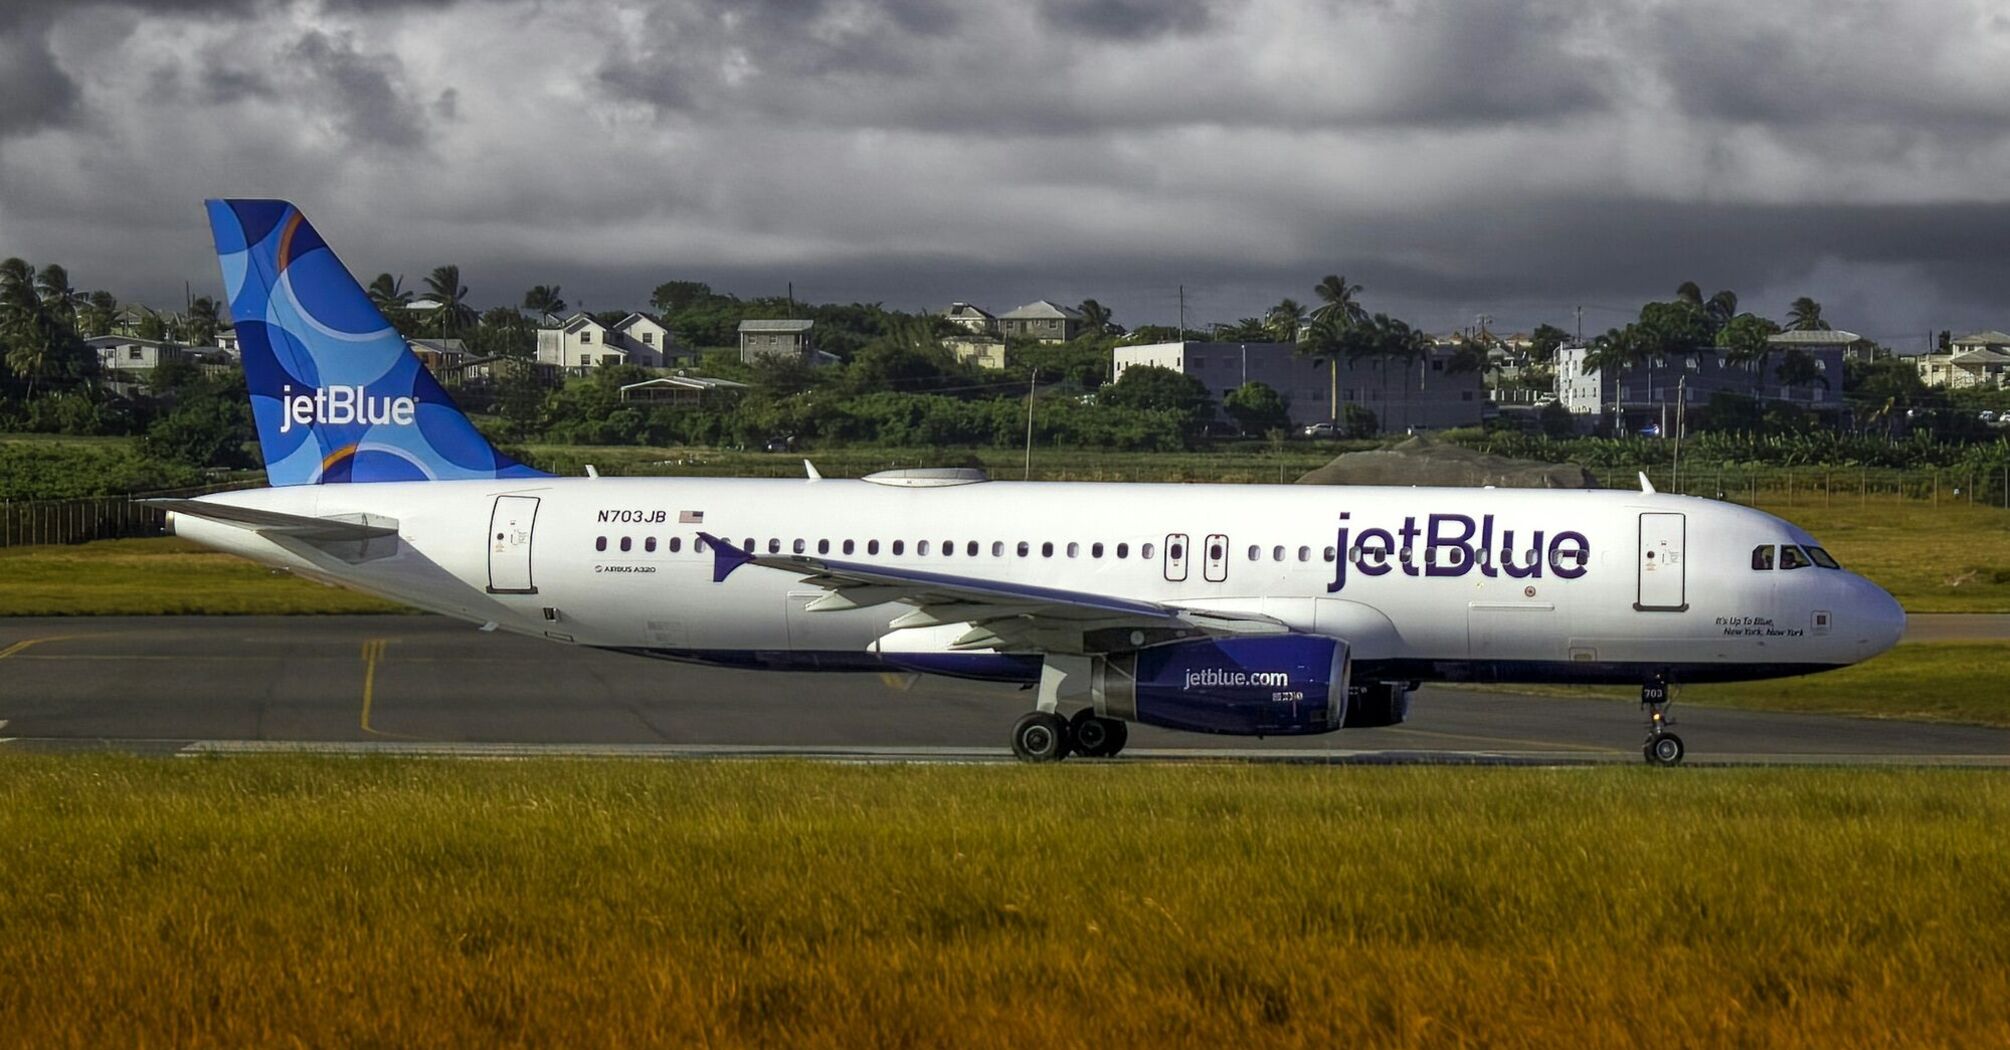 A jet blue airplane is on the runway